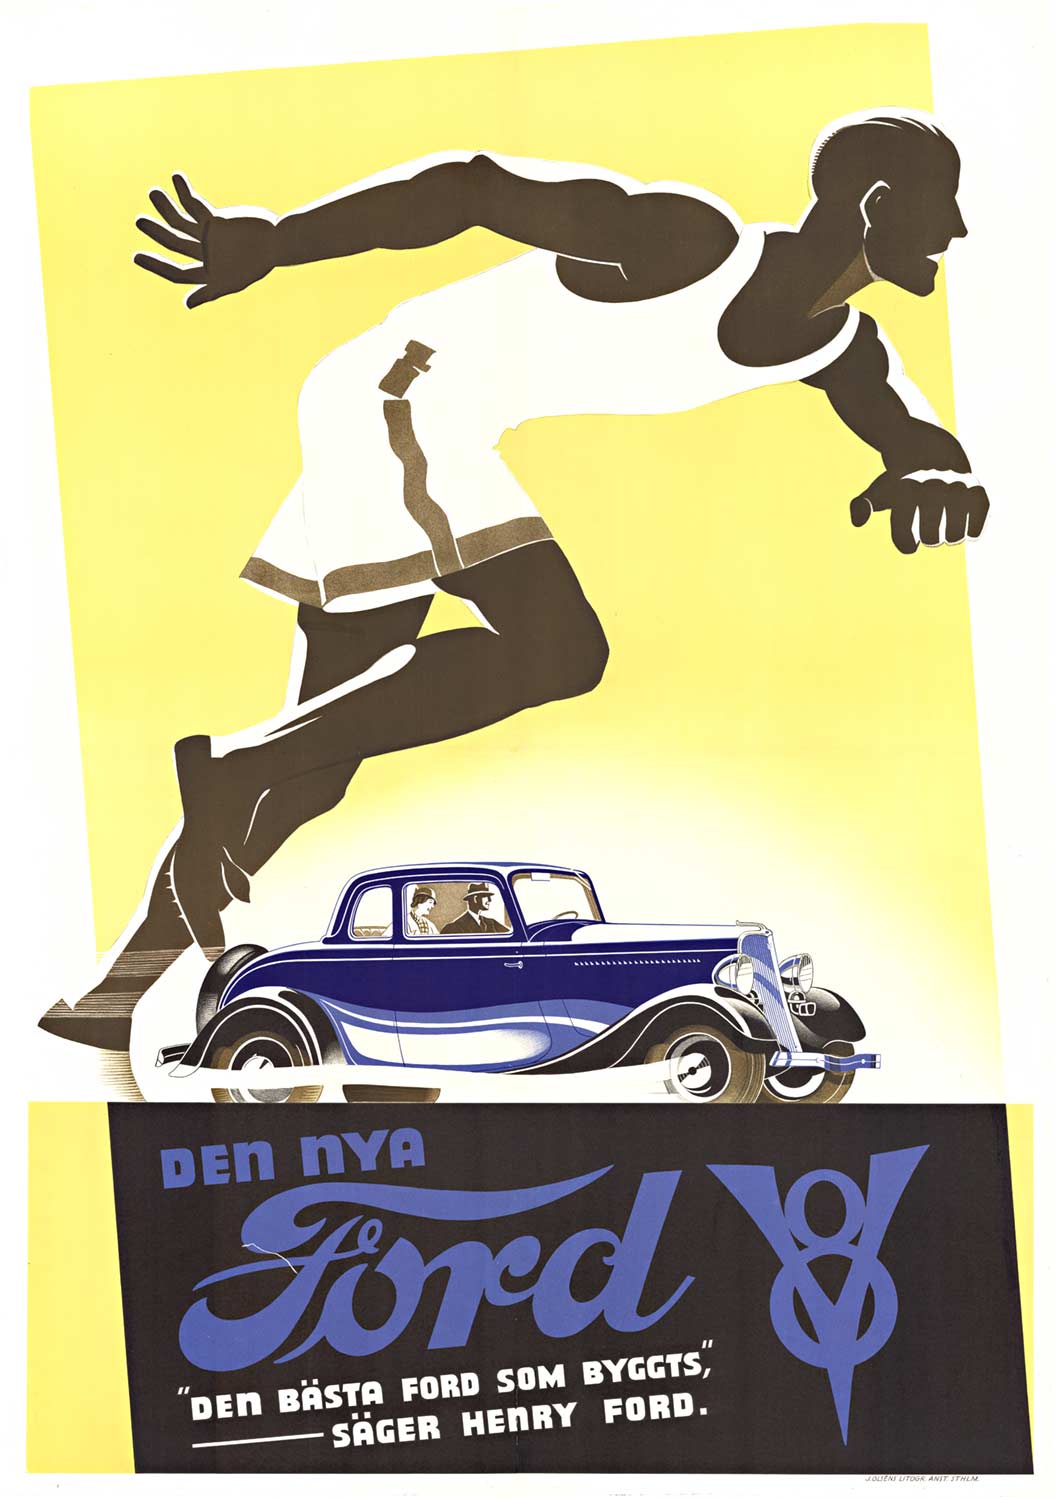 Original Ford V8 vintage Swedish poster, c. 1932. Archival linen backed and ready to frame. In very good condition with expertly restored fold marks. <br>Printer: Olséns Litogr. Anst. Sthlm. <br> <br>Henry Ford and Ford Motor Company revolutionized